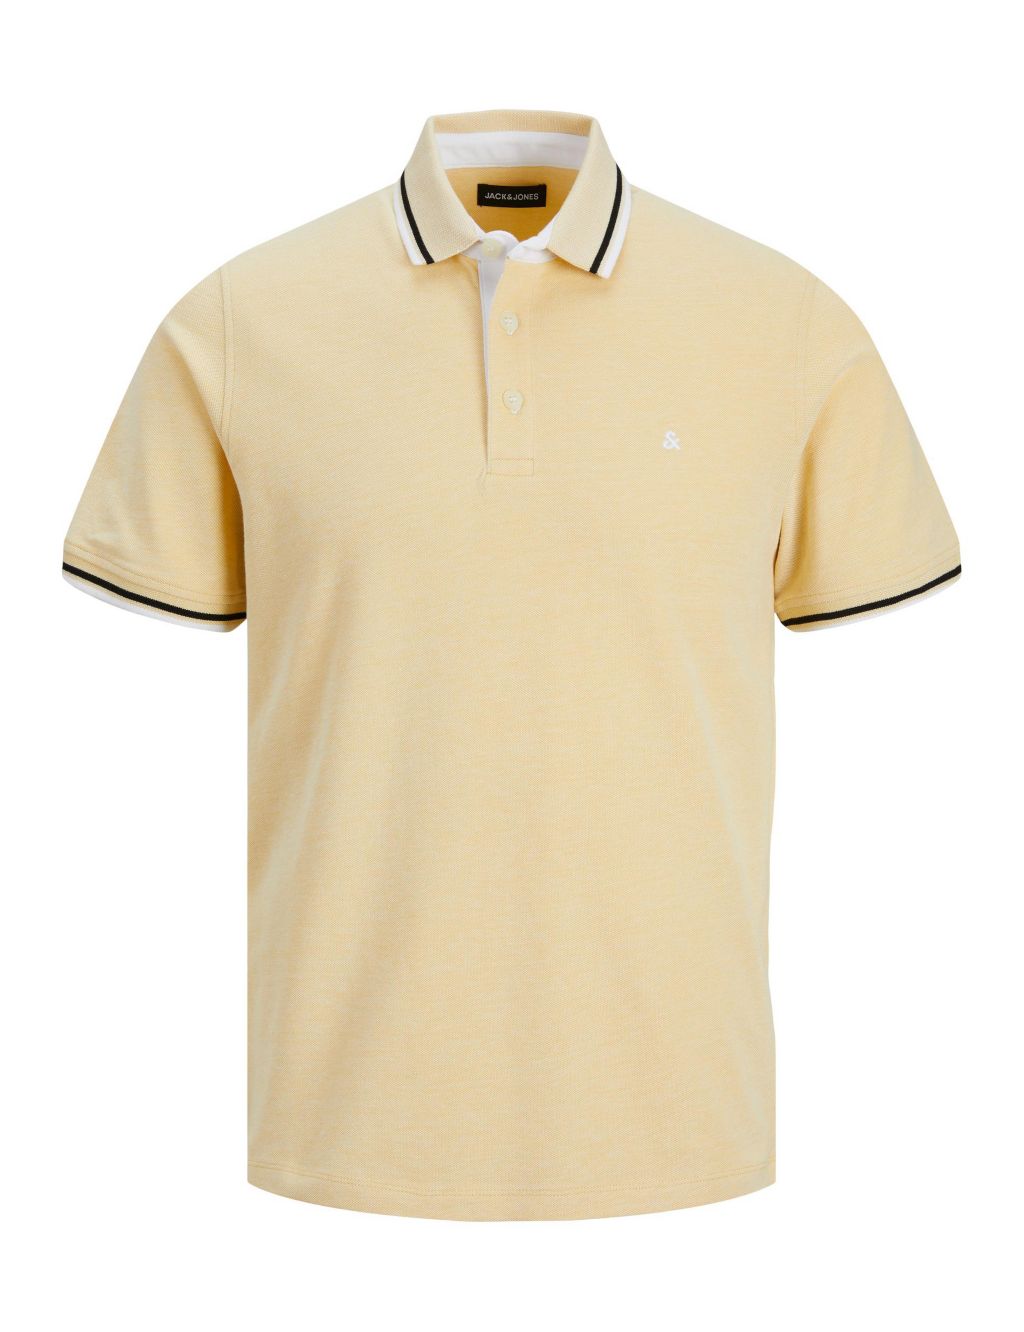 Slim Fit Pure Cotton Tipped Polo Shirt image 2